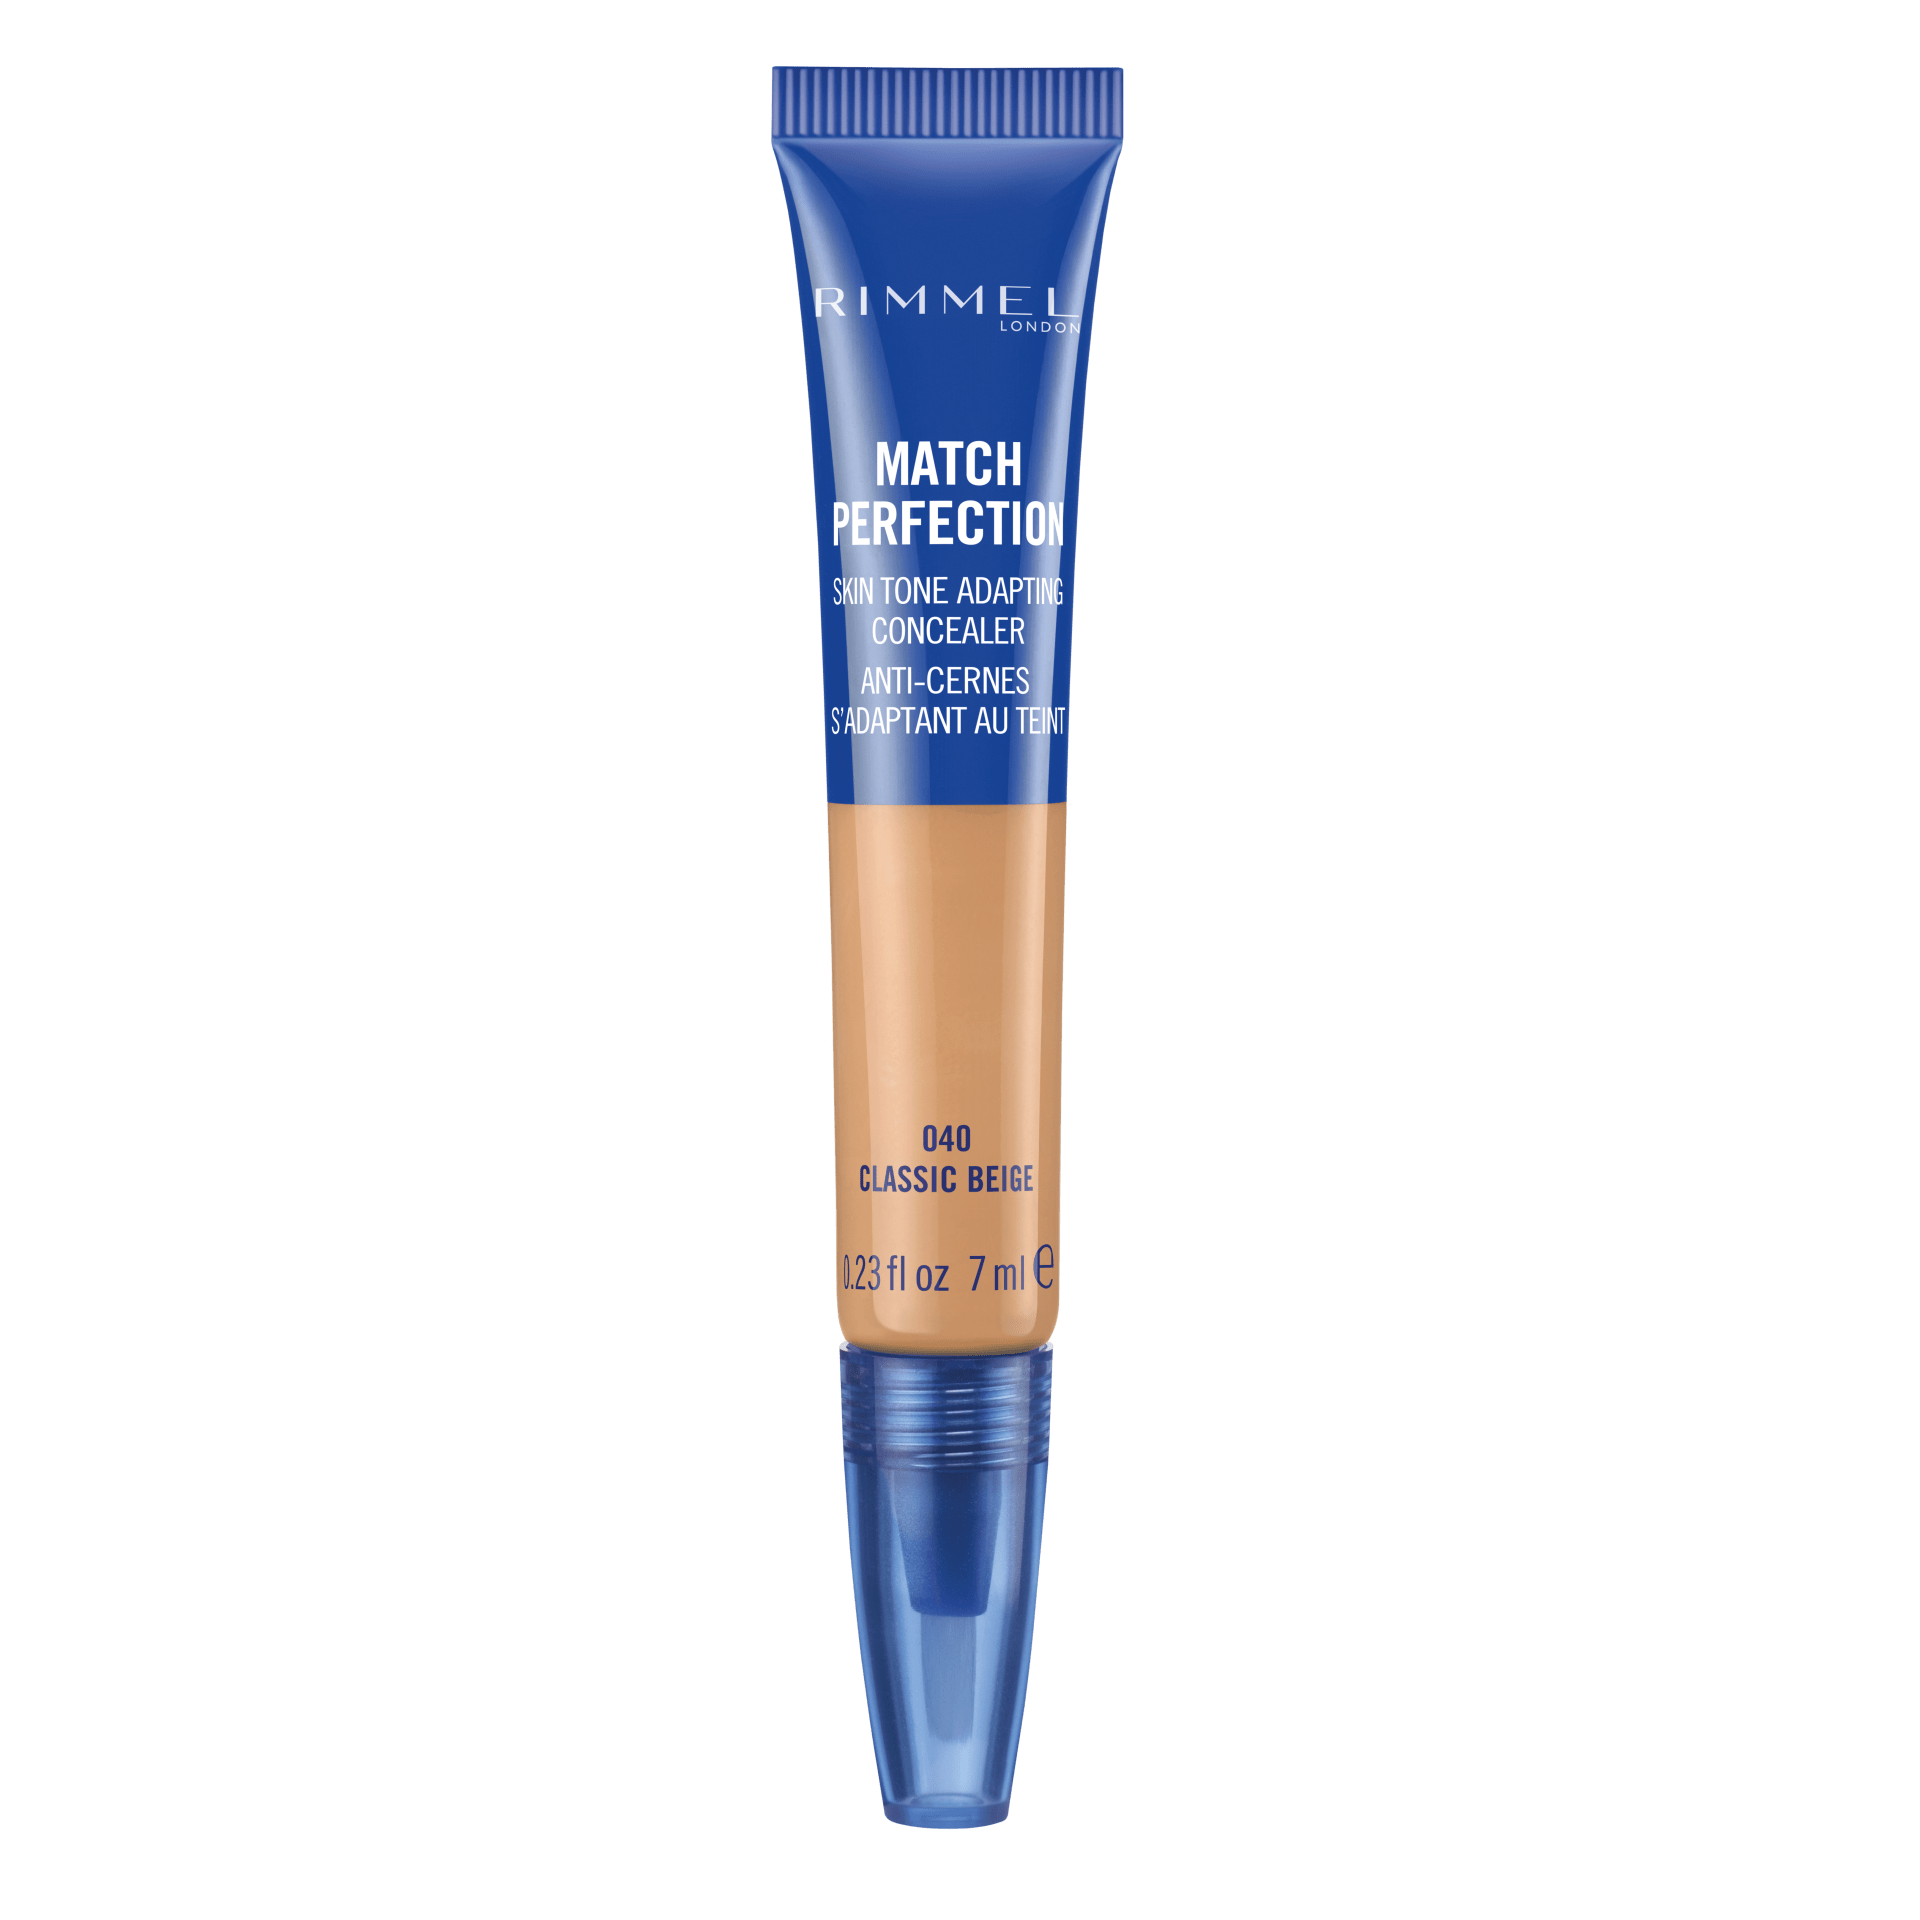 Match Perfection Concealer | Rimmel London - Give Us Beauty